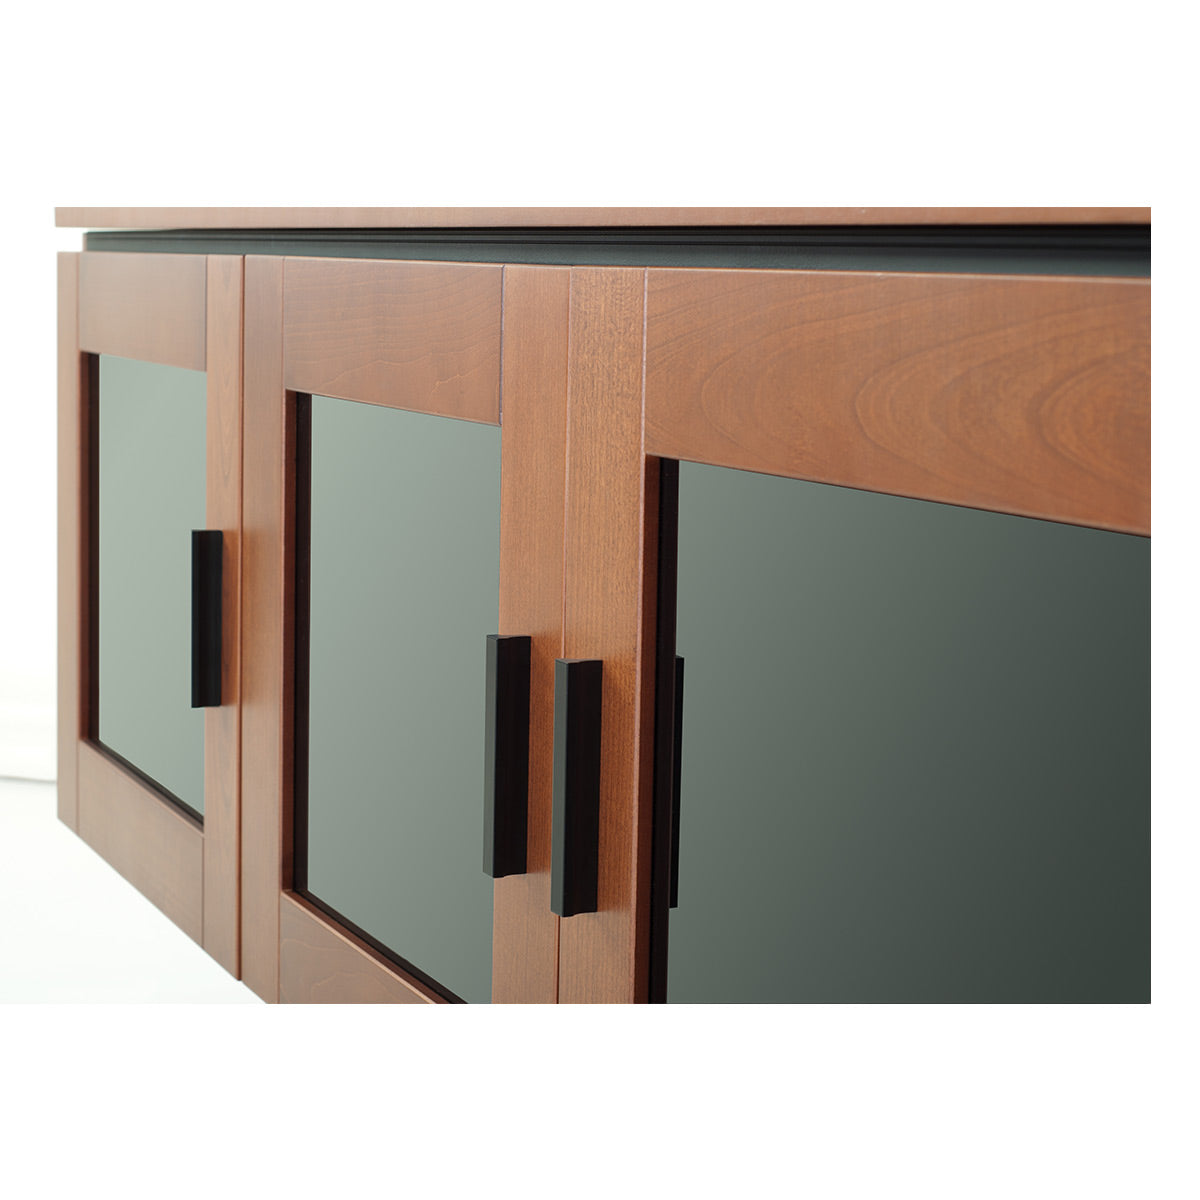 Salamander Chameleon Collection Elba 237 Triple AV Cabinet (Wide Framed American Cherry Doors with Smoked Glass Inserts)